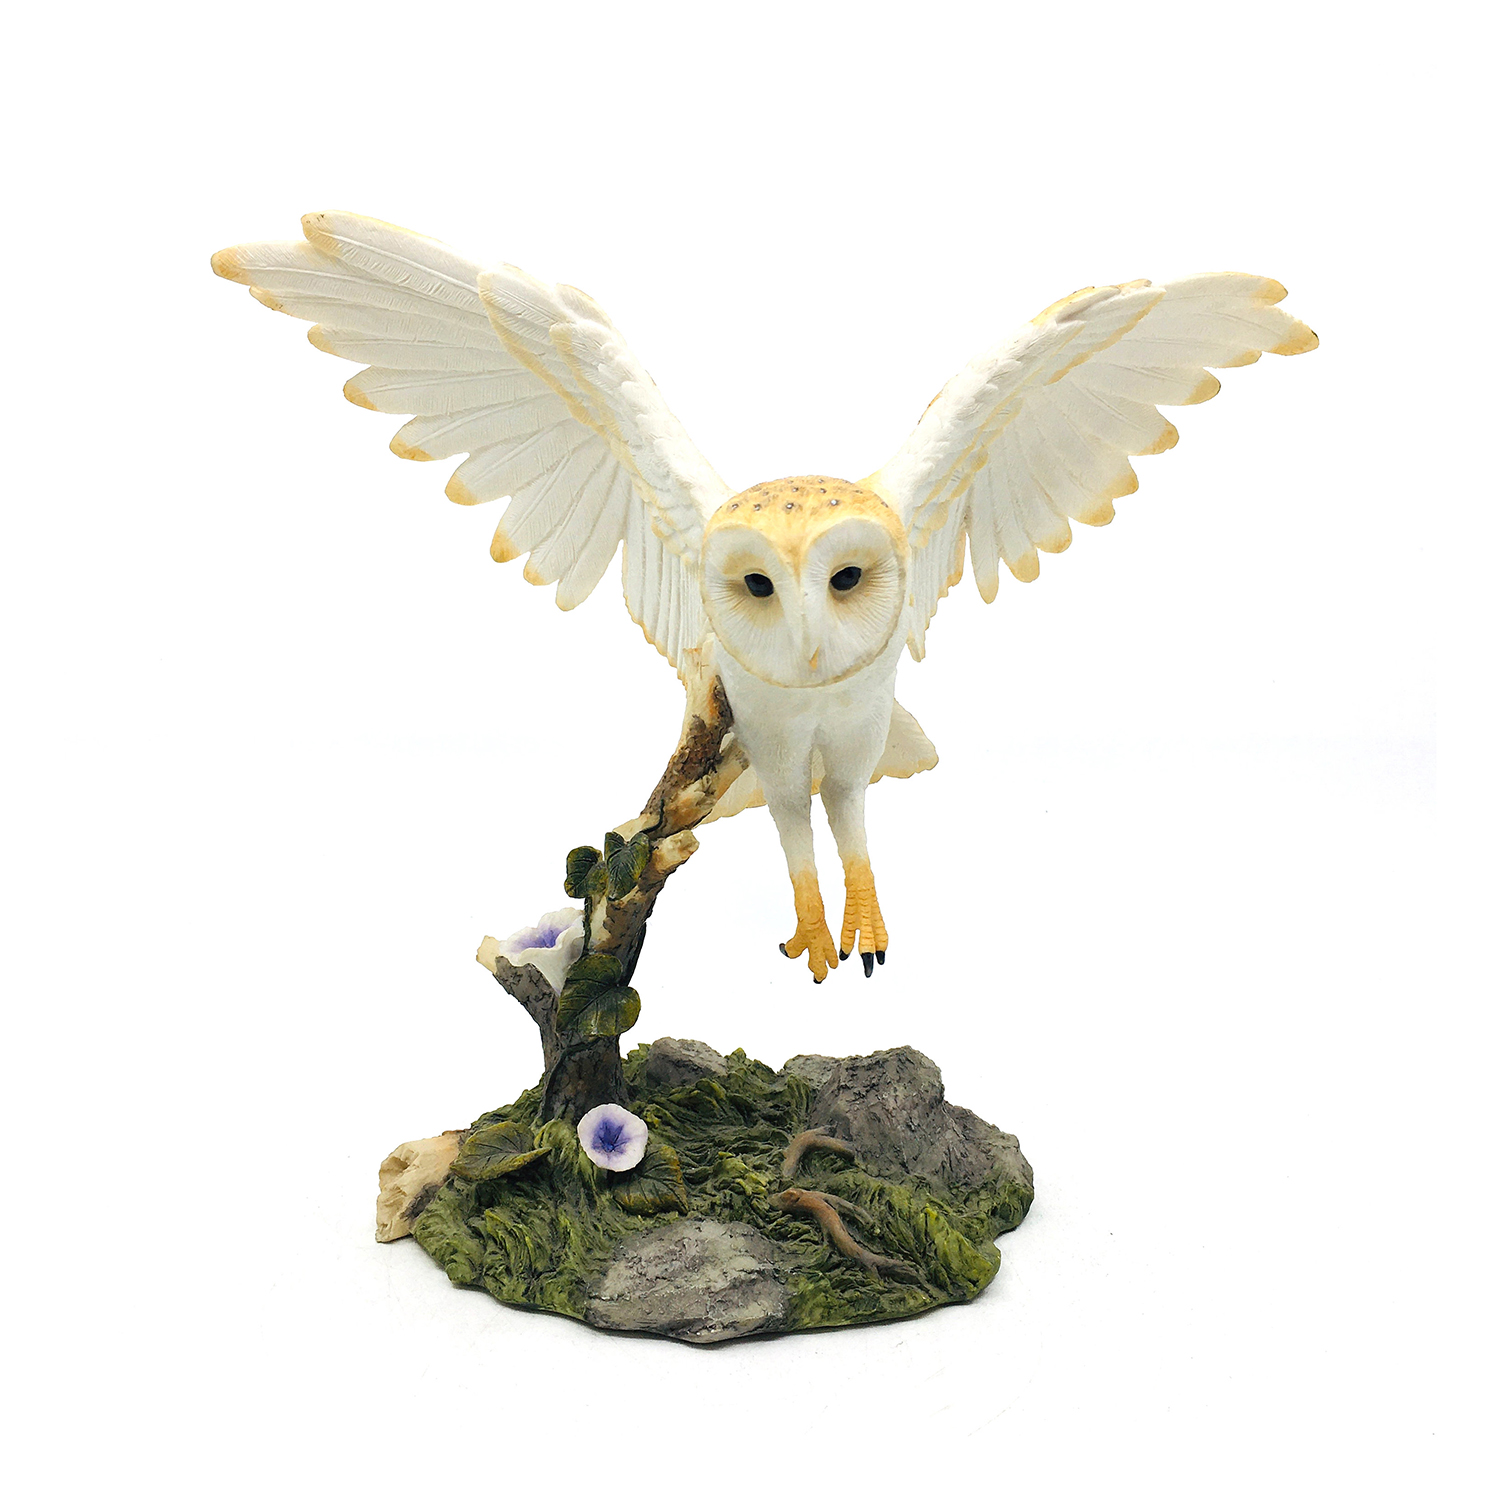 Owl Figurines for Sale